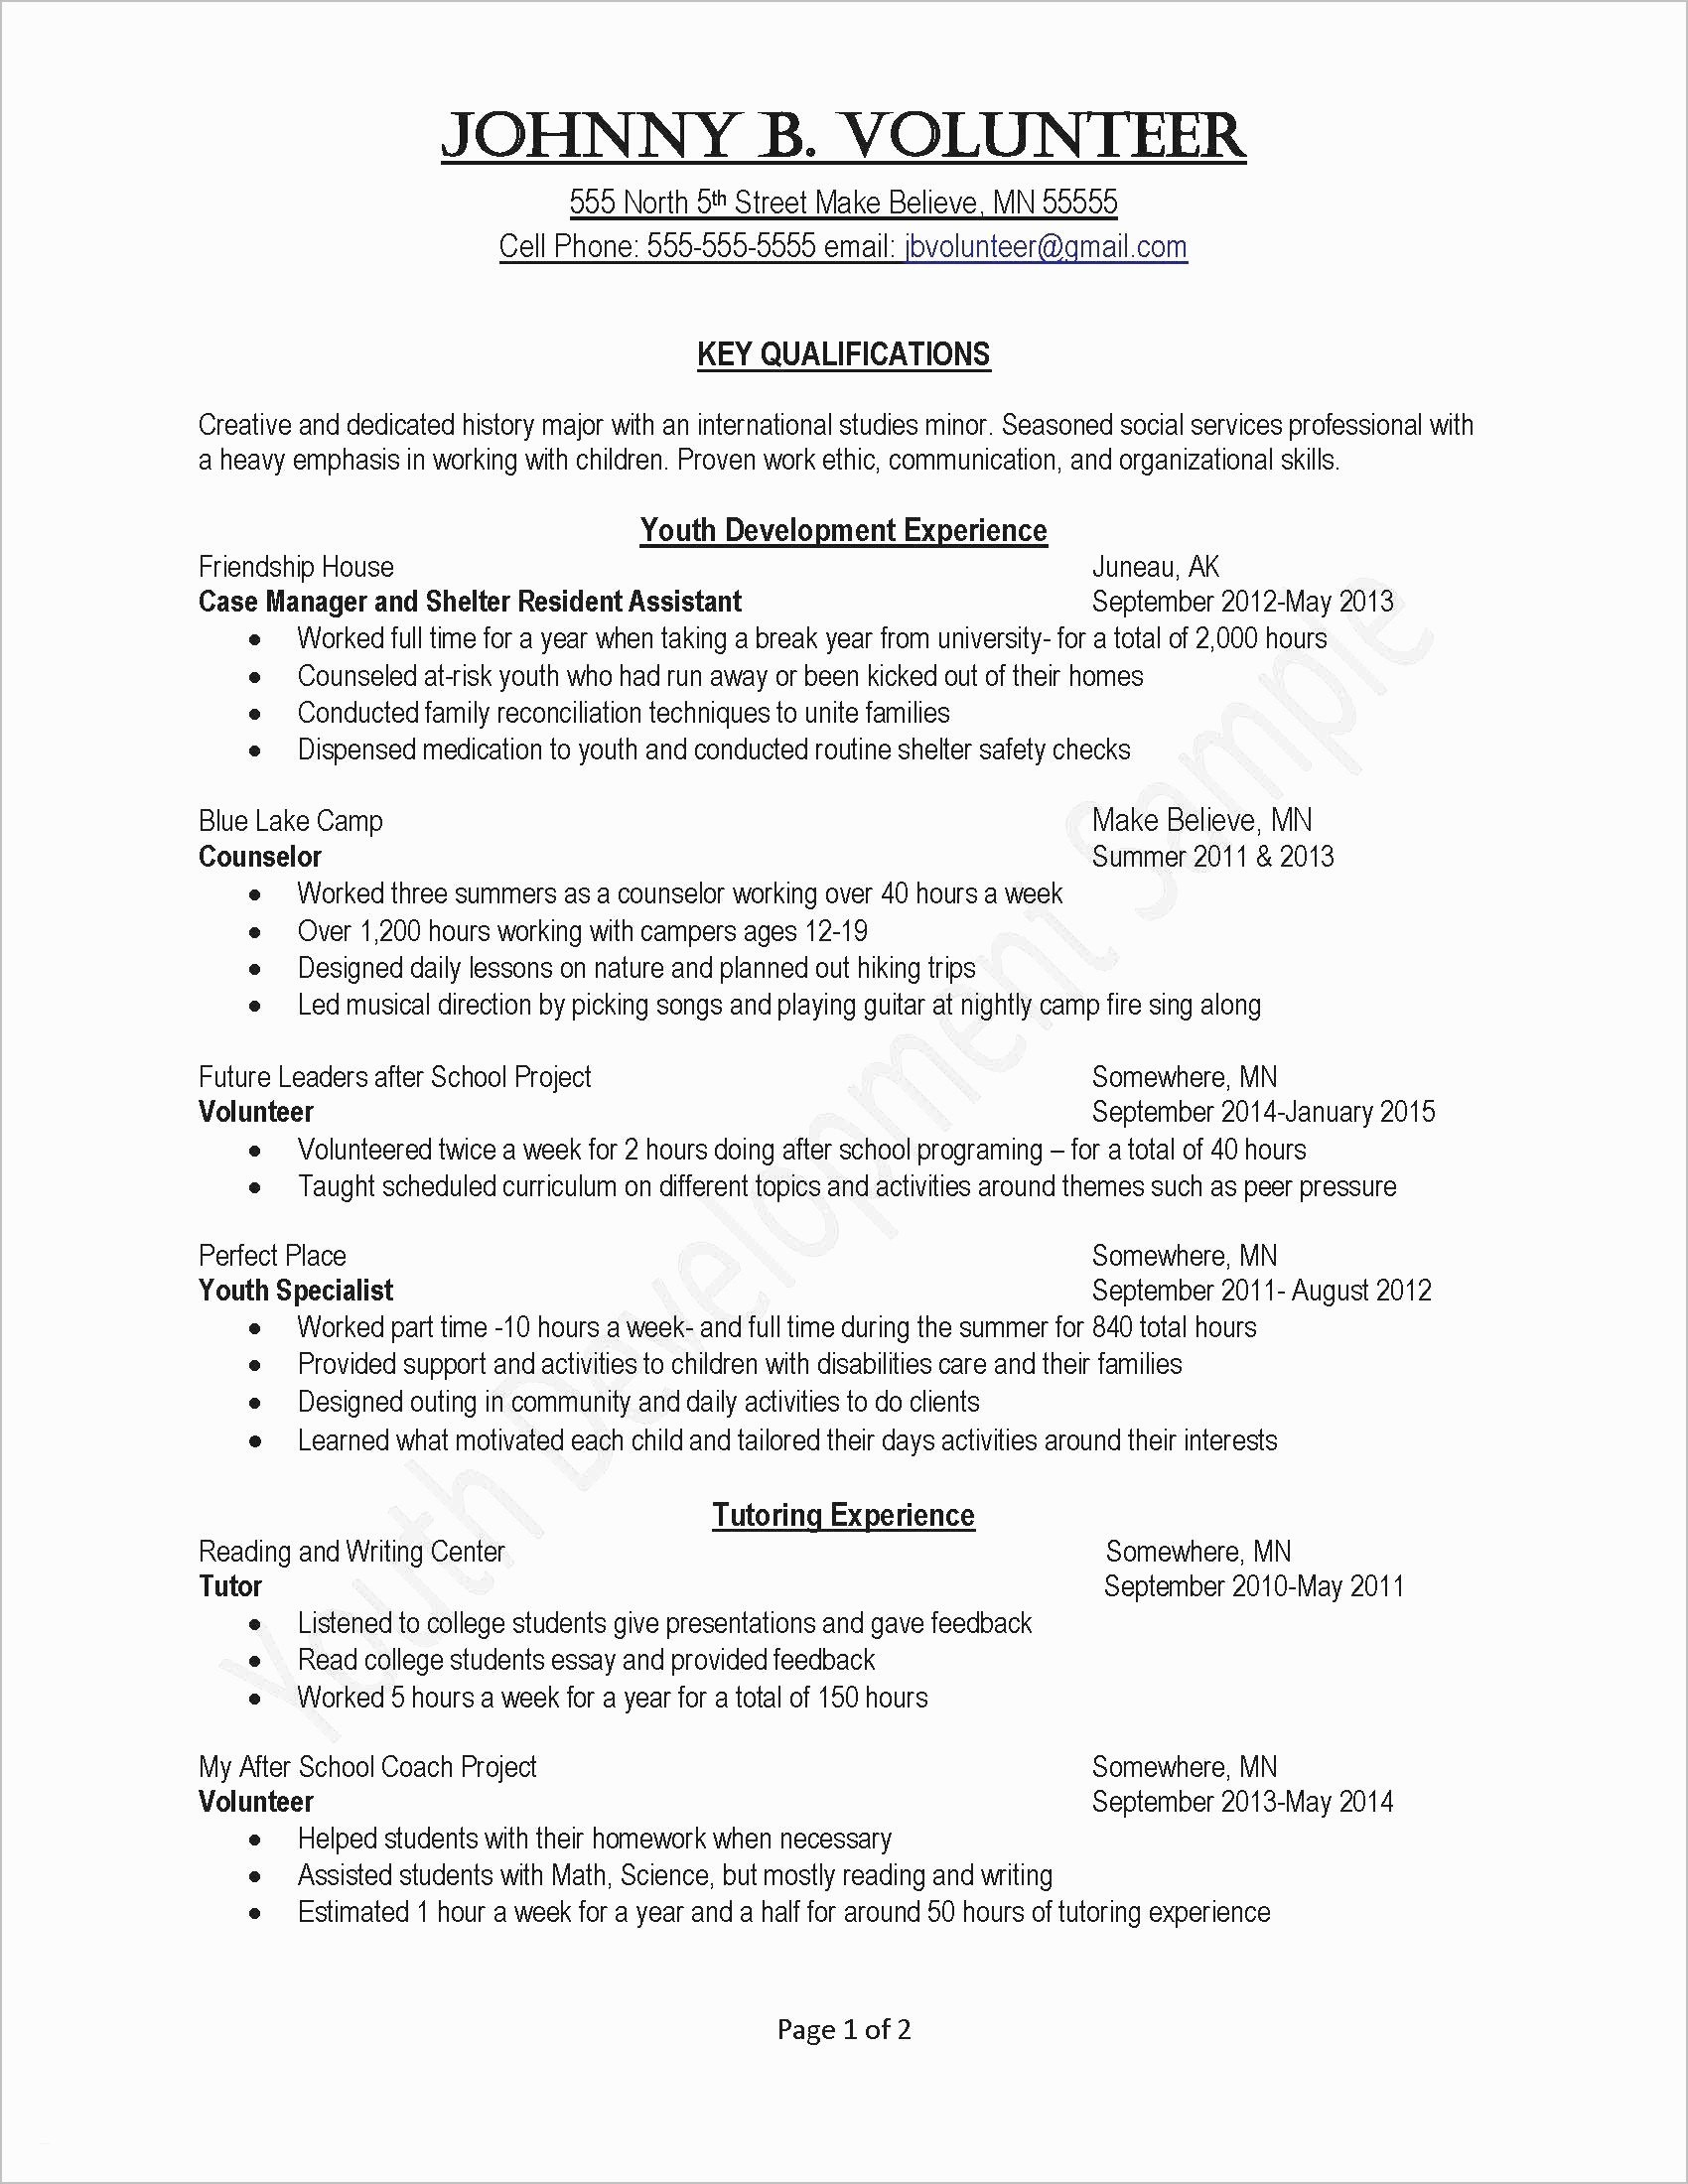 Mission Letter Template - Writing A Cover Letter for Teaching Position Refrence Teaching